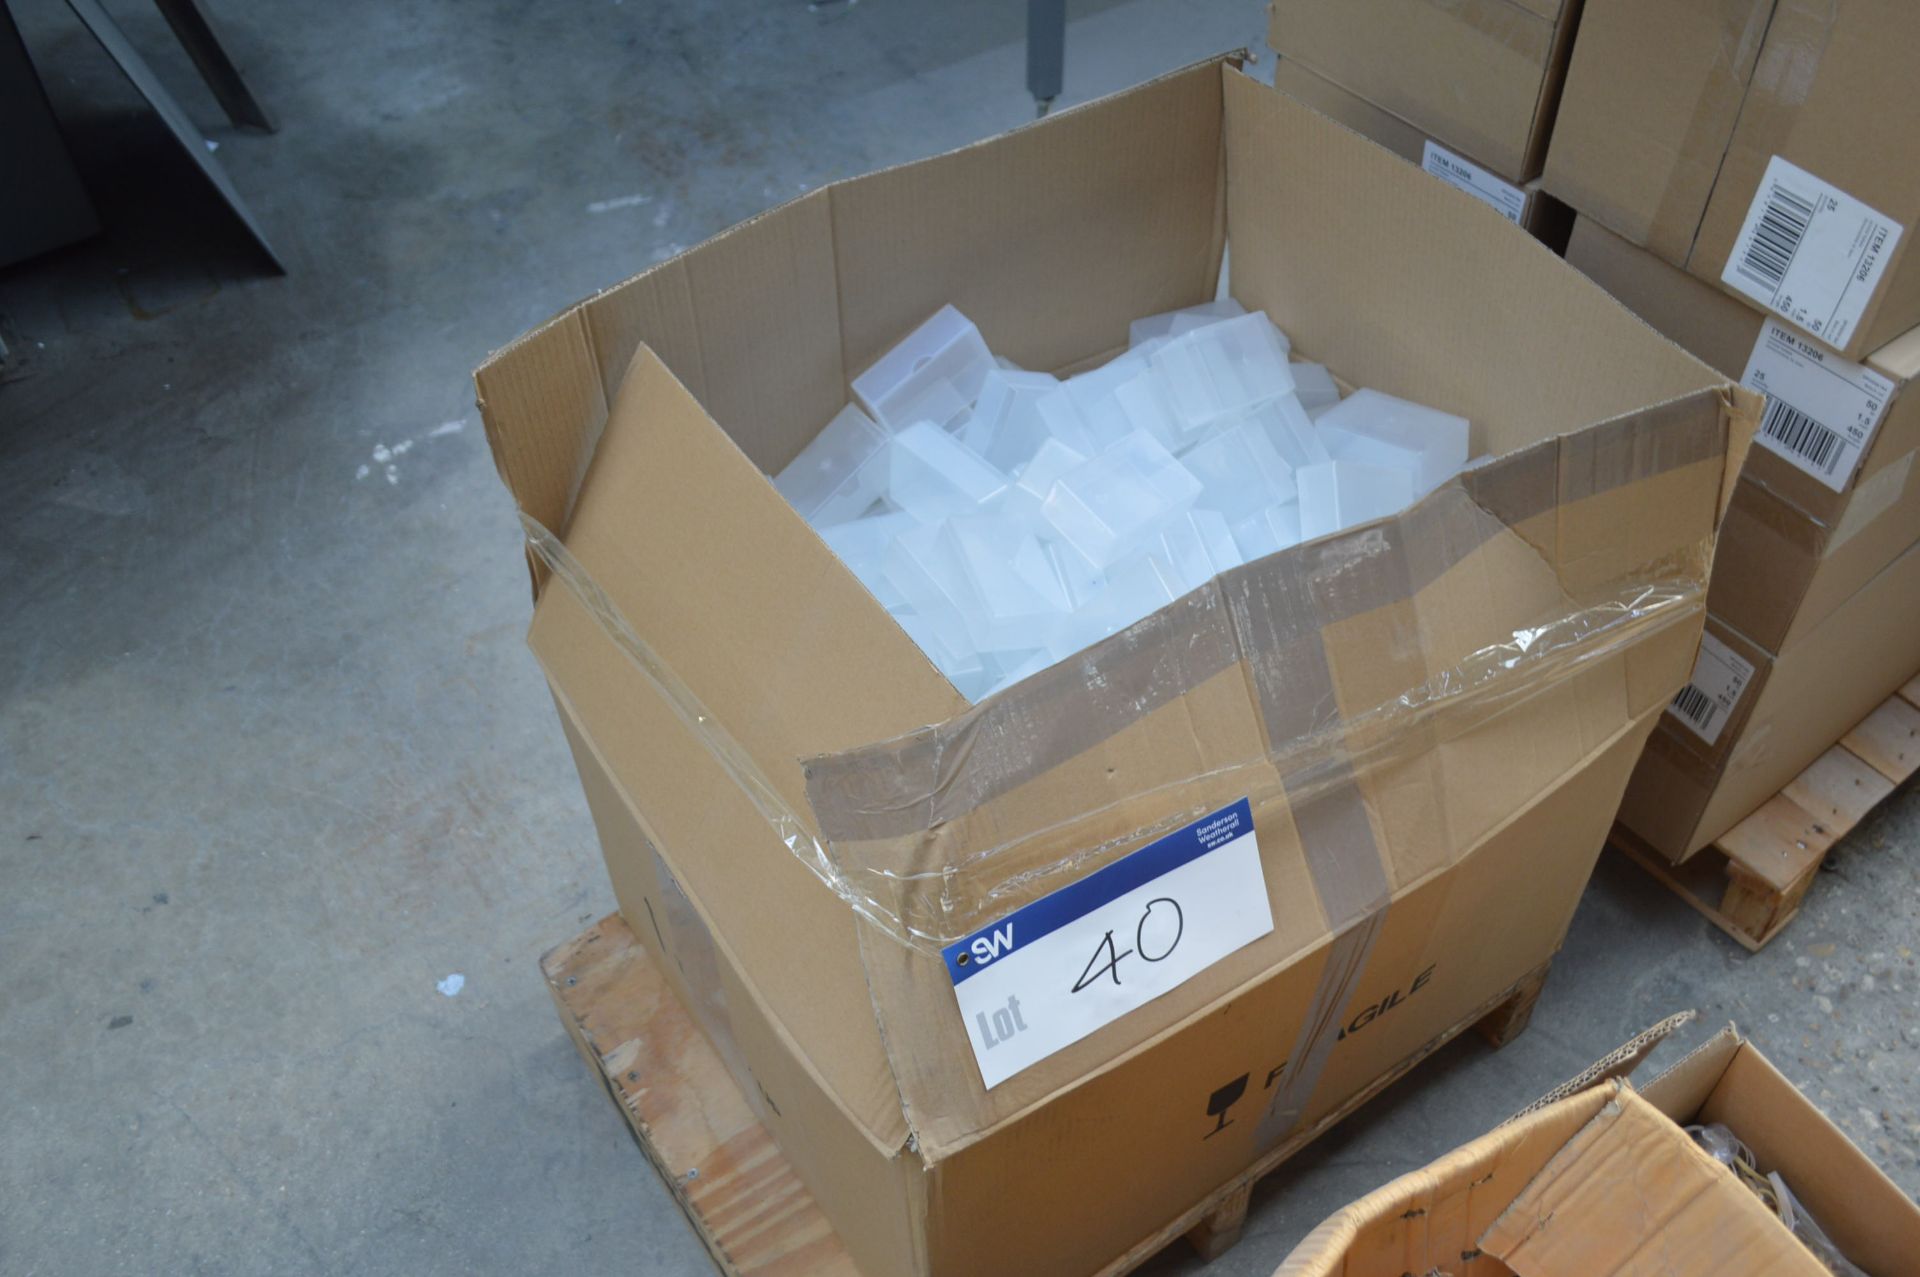 Plastic Business Card Boxes, in cardboard box * PLEASE NOTE THIS LOT MUST BE CLEARED BY 4pm FRIDAY